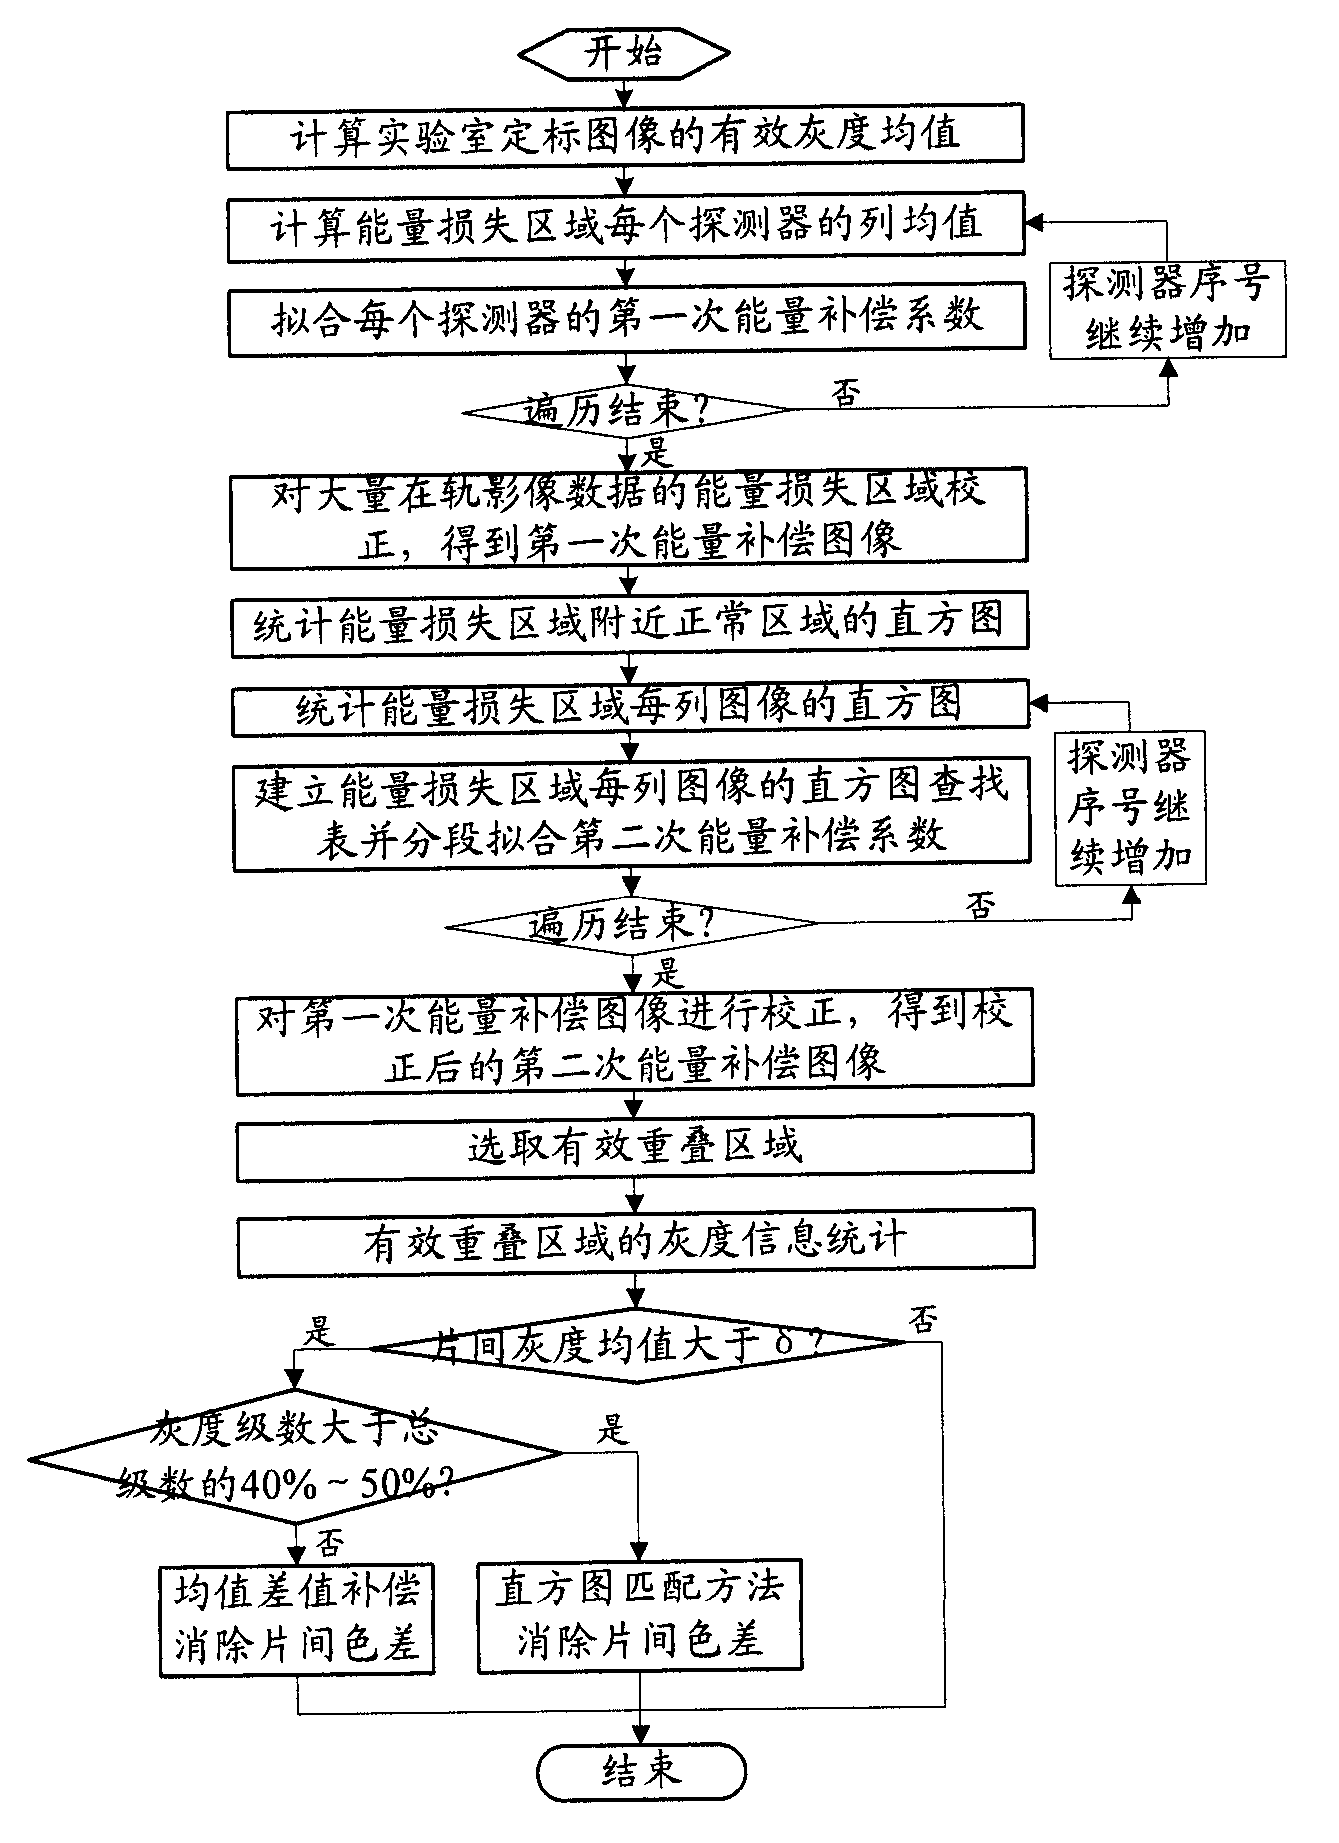 Energy compensation and chromatic aberration removal method for total-reflection optical splicing cameras